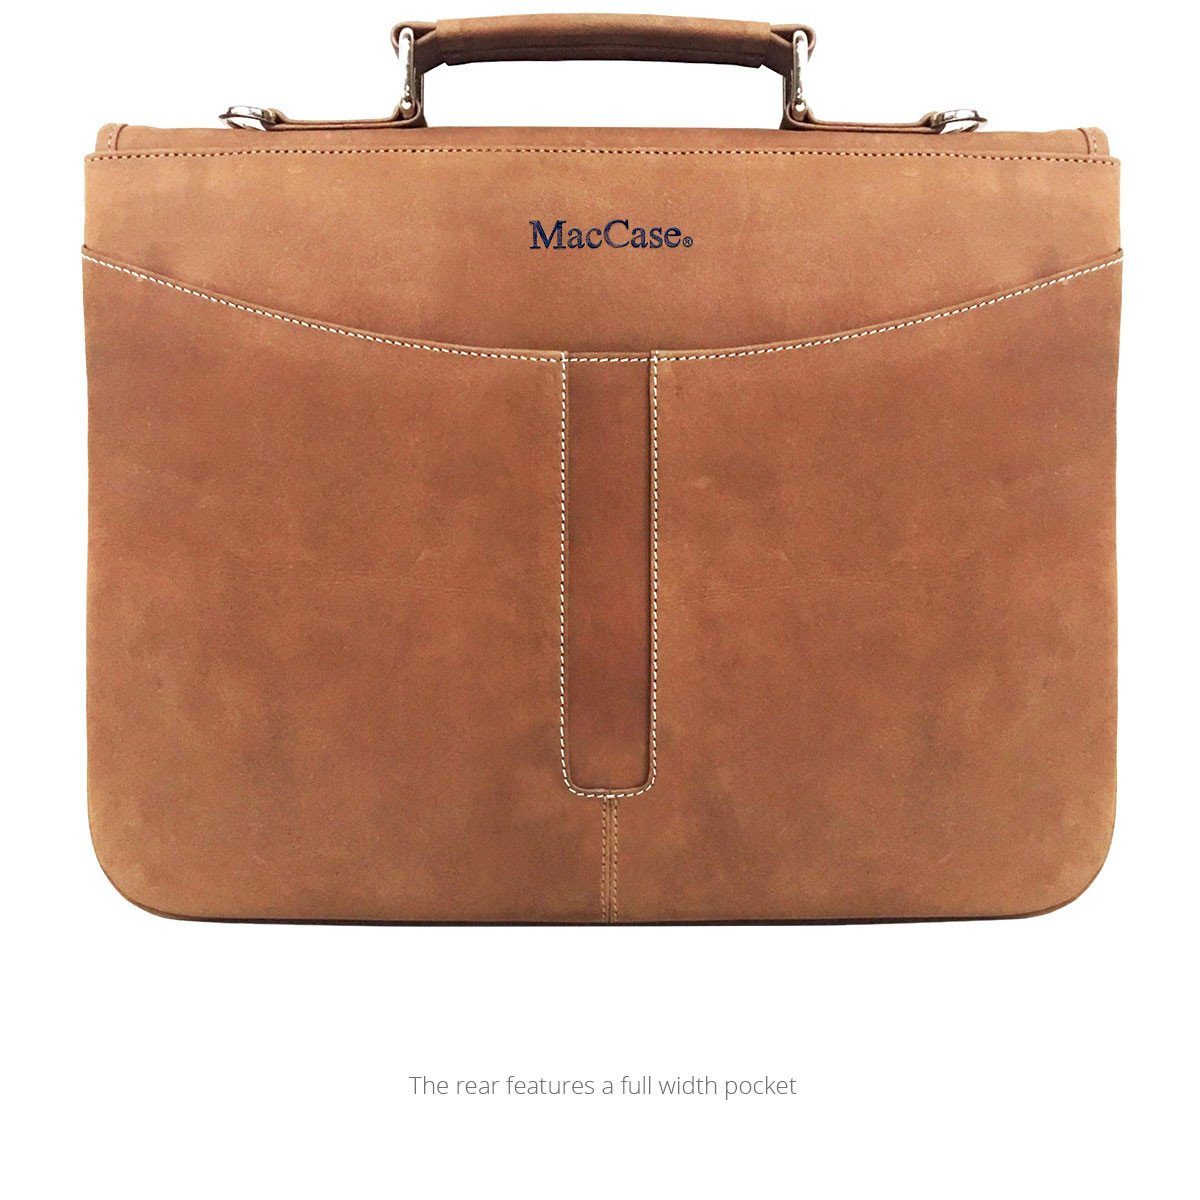 The Incredible 16 MacBook Pro Backpack by MacCase